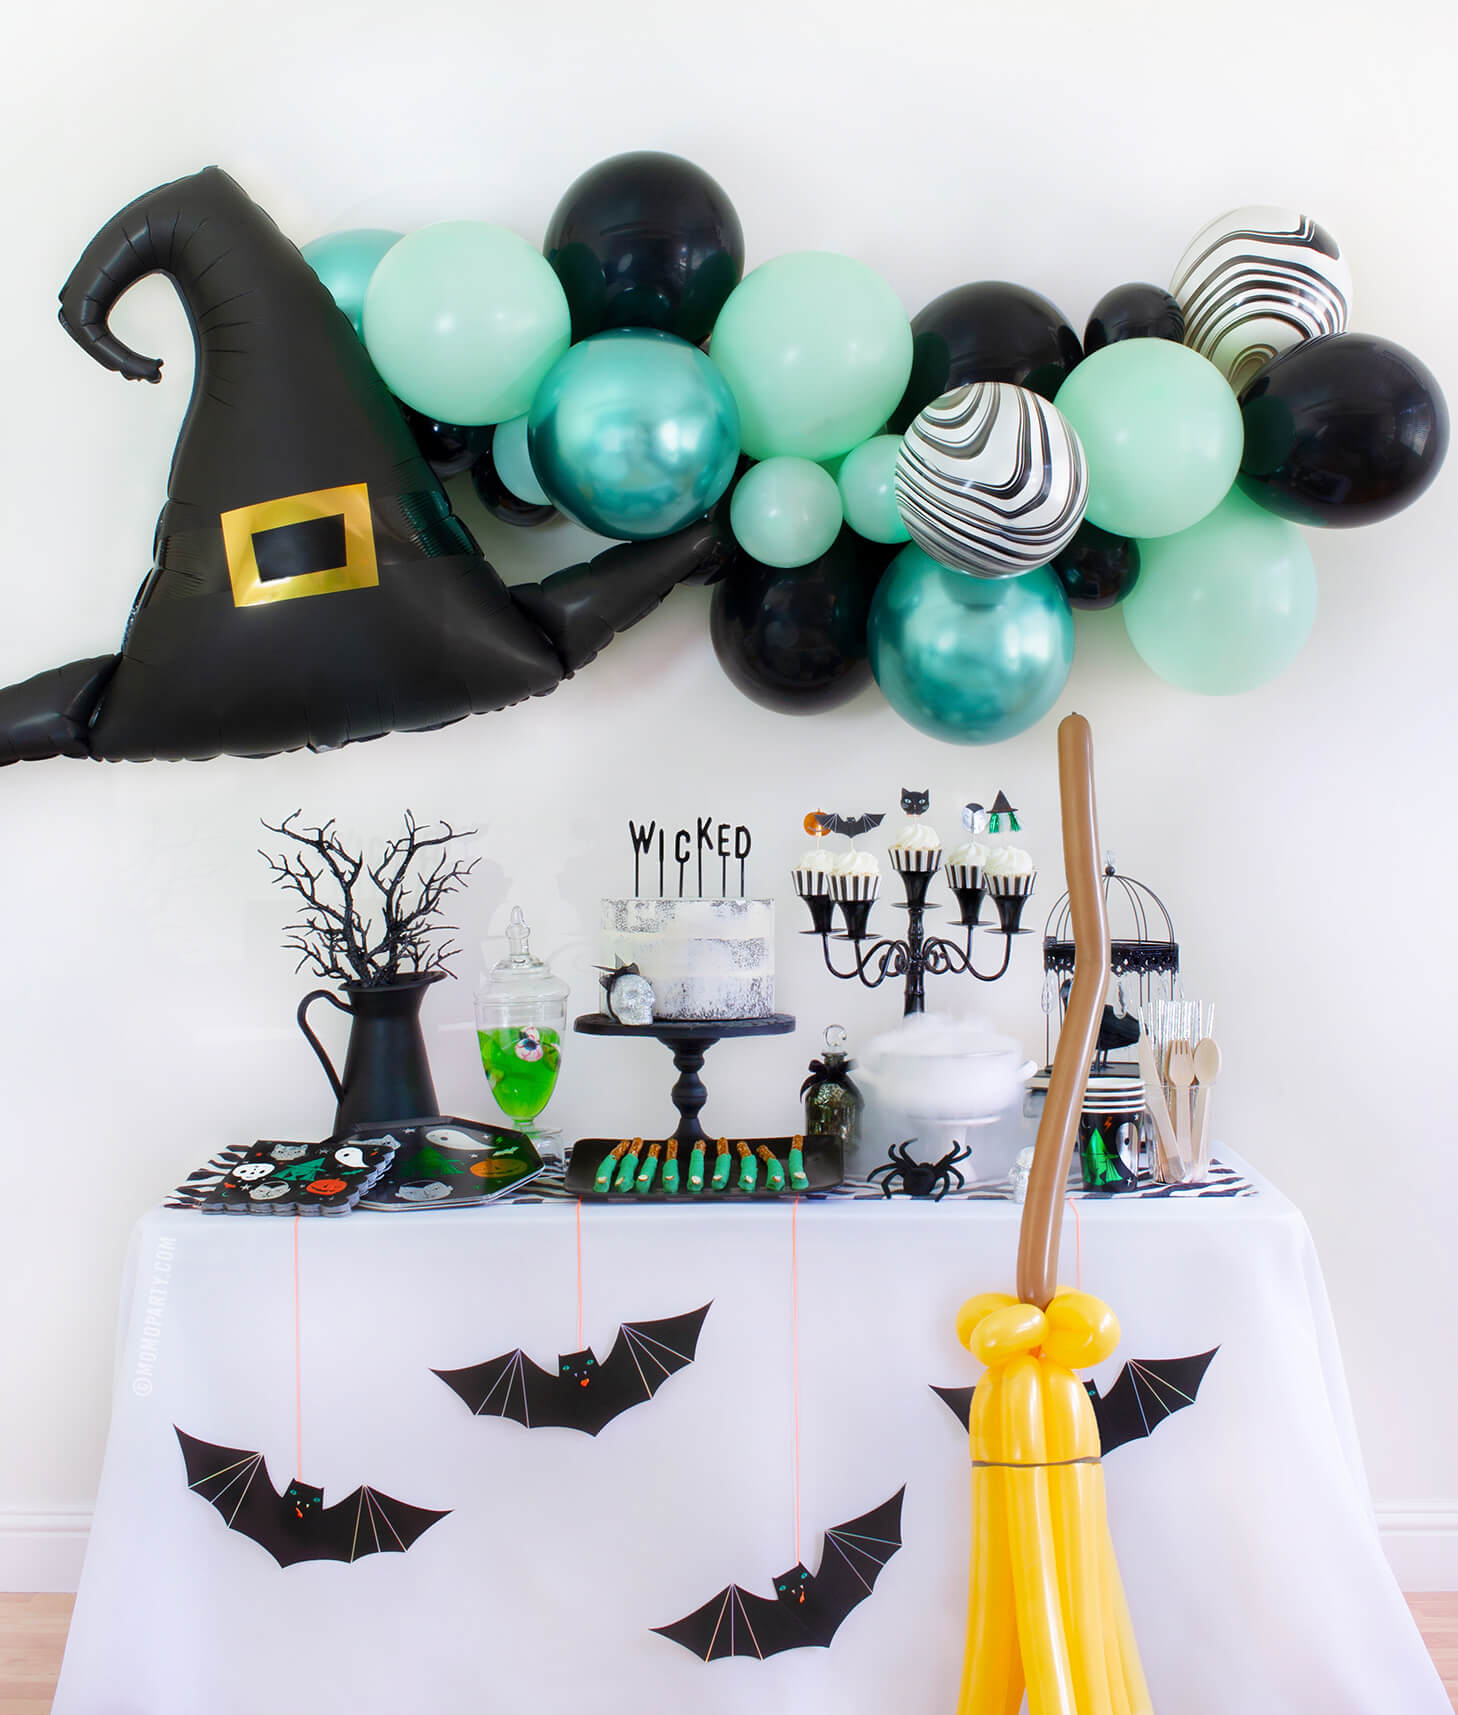 Momo Party 2020 Witch Please themed Halloween Party at home inspiration look with Anagram Witch Hat Satin Foil Balloon and pastel Green toned Latex Balloon Garland for wall decoration. Meri Meri Halloween Motif Dinner Plates, napkins and cups, cake with letter board cake topper spelled of "Wicked", witch cauldron, Apple jelly with eyeball candy in a jar, witch fingers pretzels on the dessert table, Meri Meri Hanging Bats and balloon animal witch broomstick in front of the table